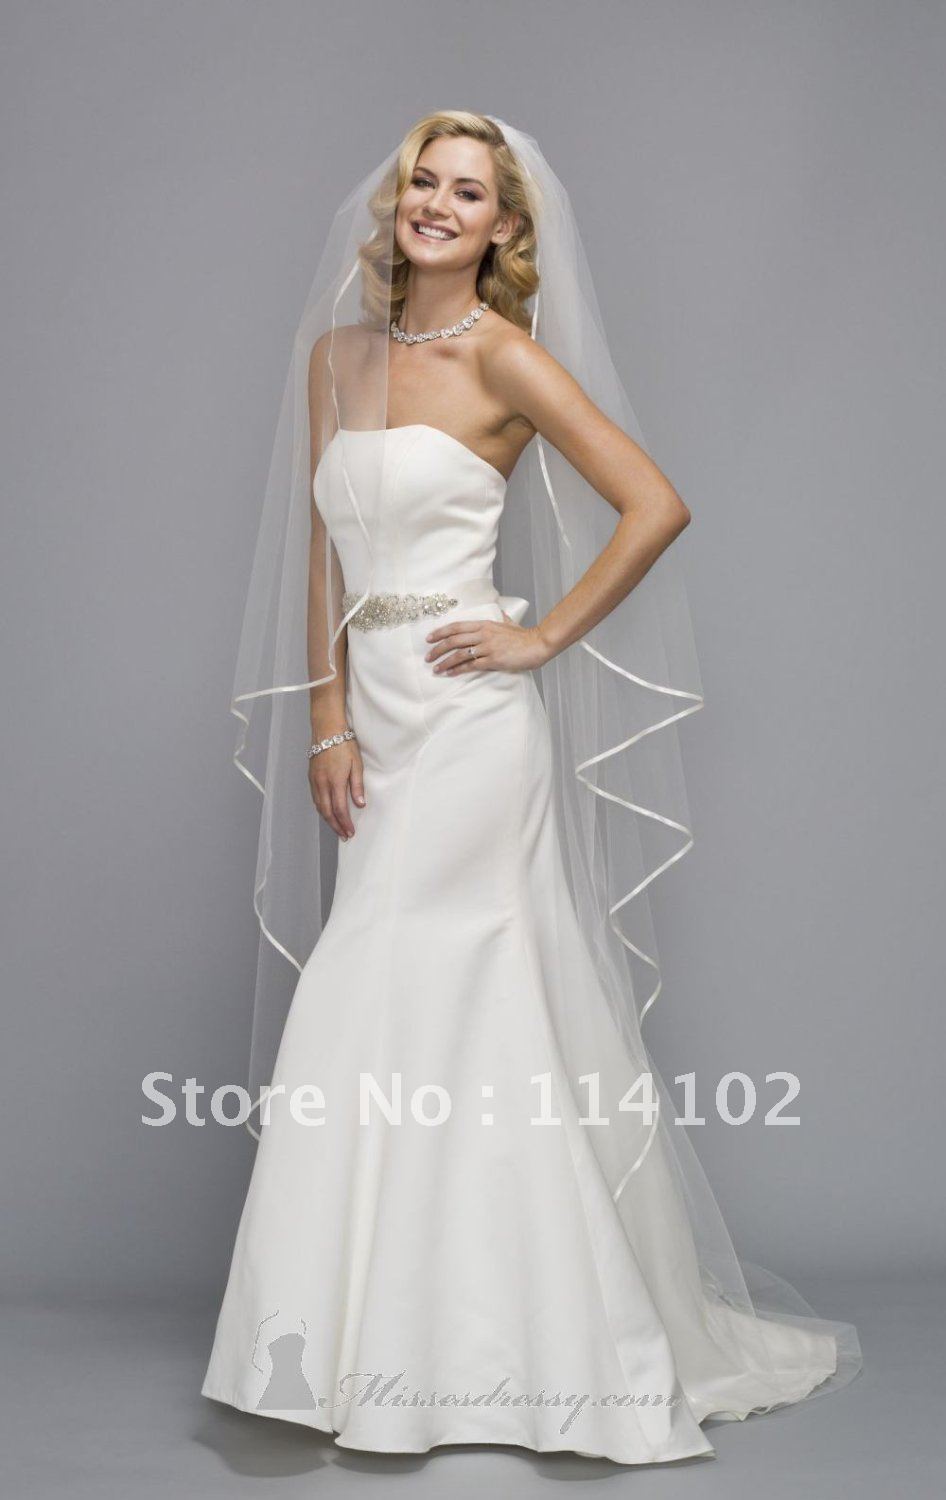 In Stock New Style Hot Sale 2012 One Layers White Ivory Wedding Accessories Bridal Veils CD13